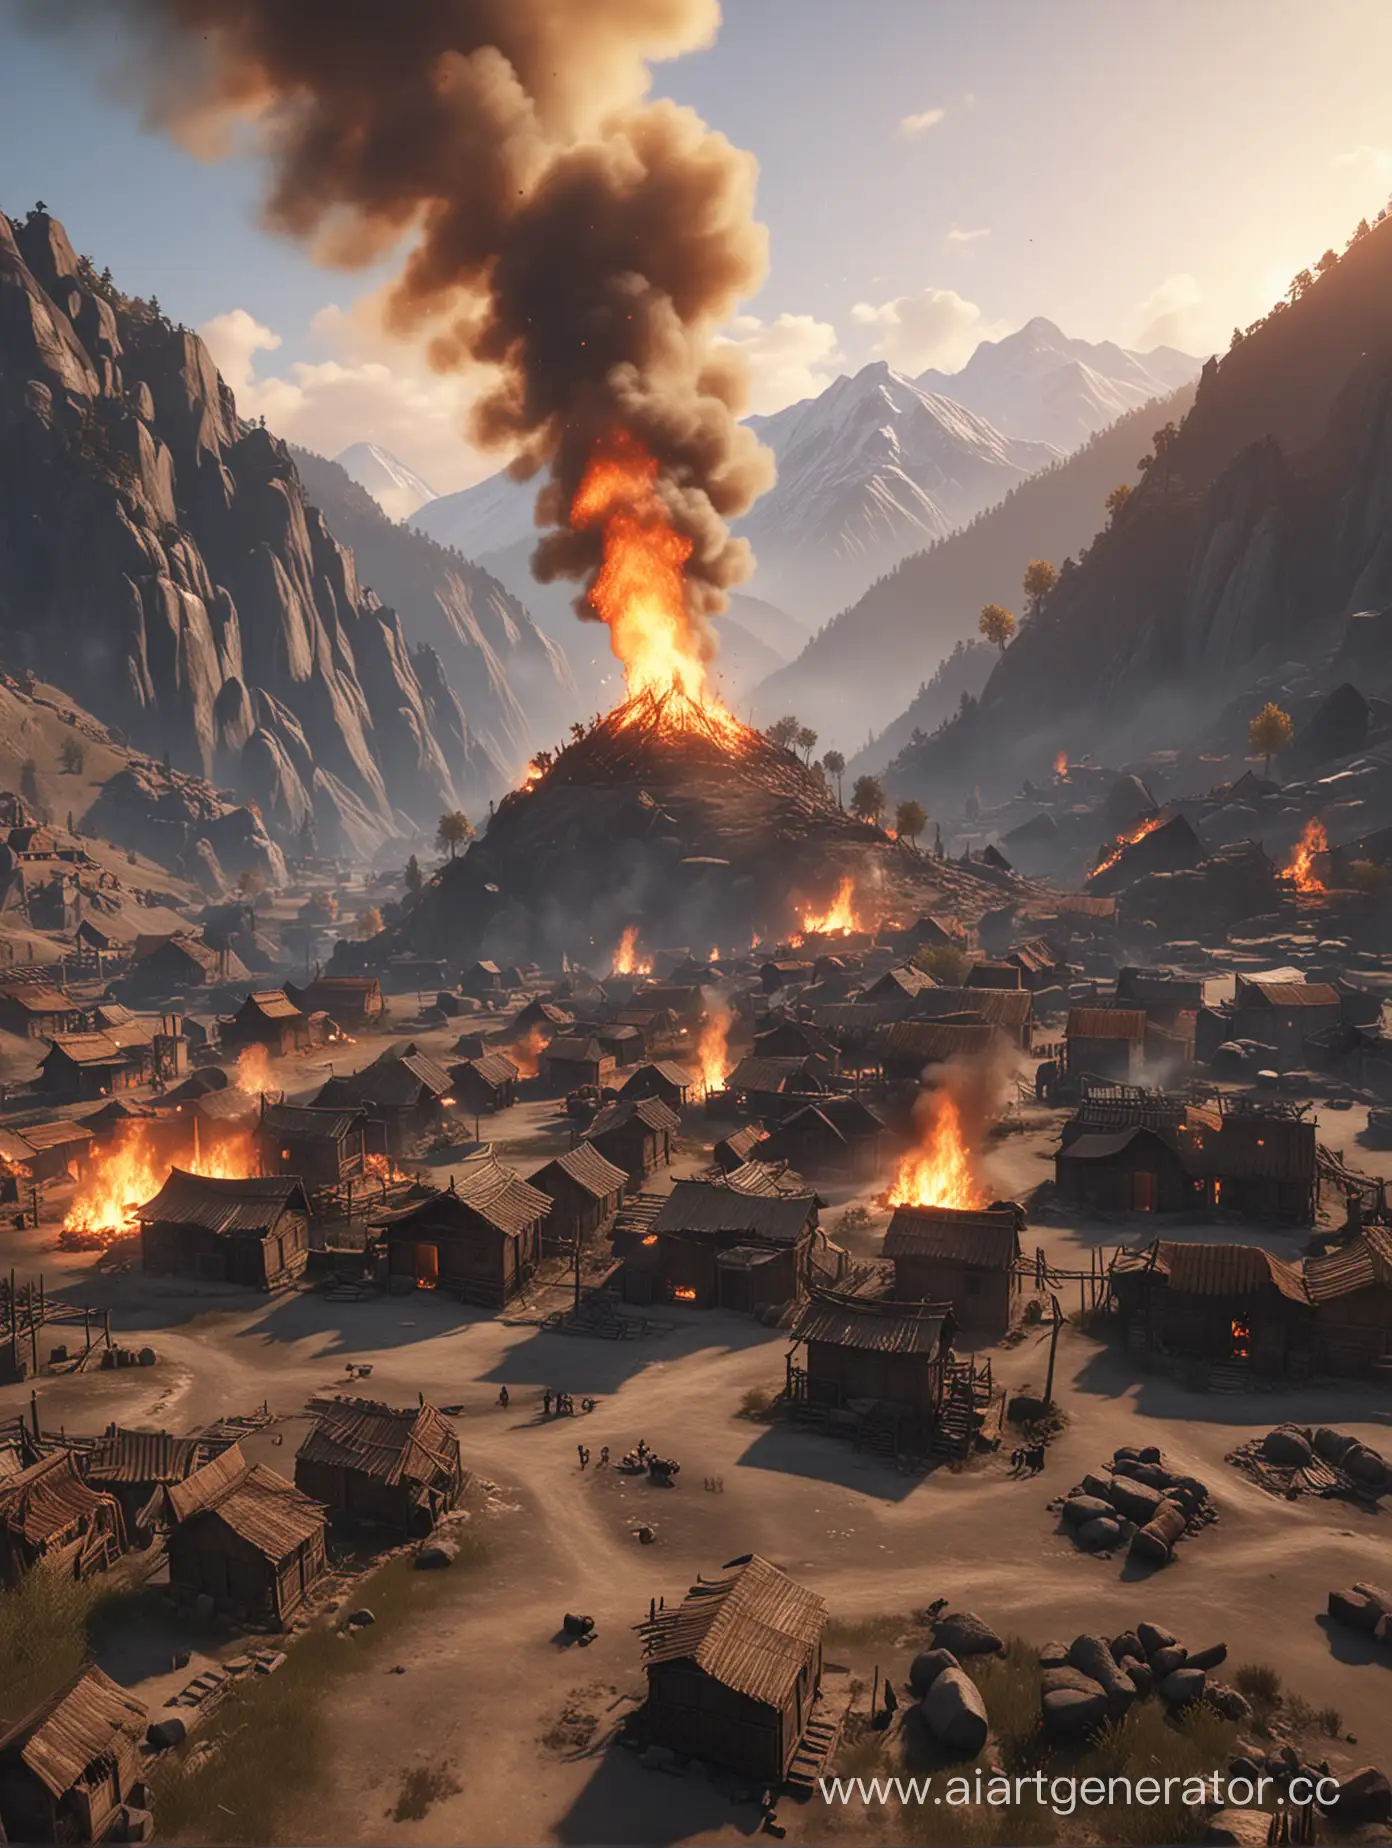 A burning, small village surrounded by mountains. First-person view of a villager